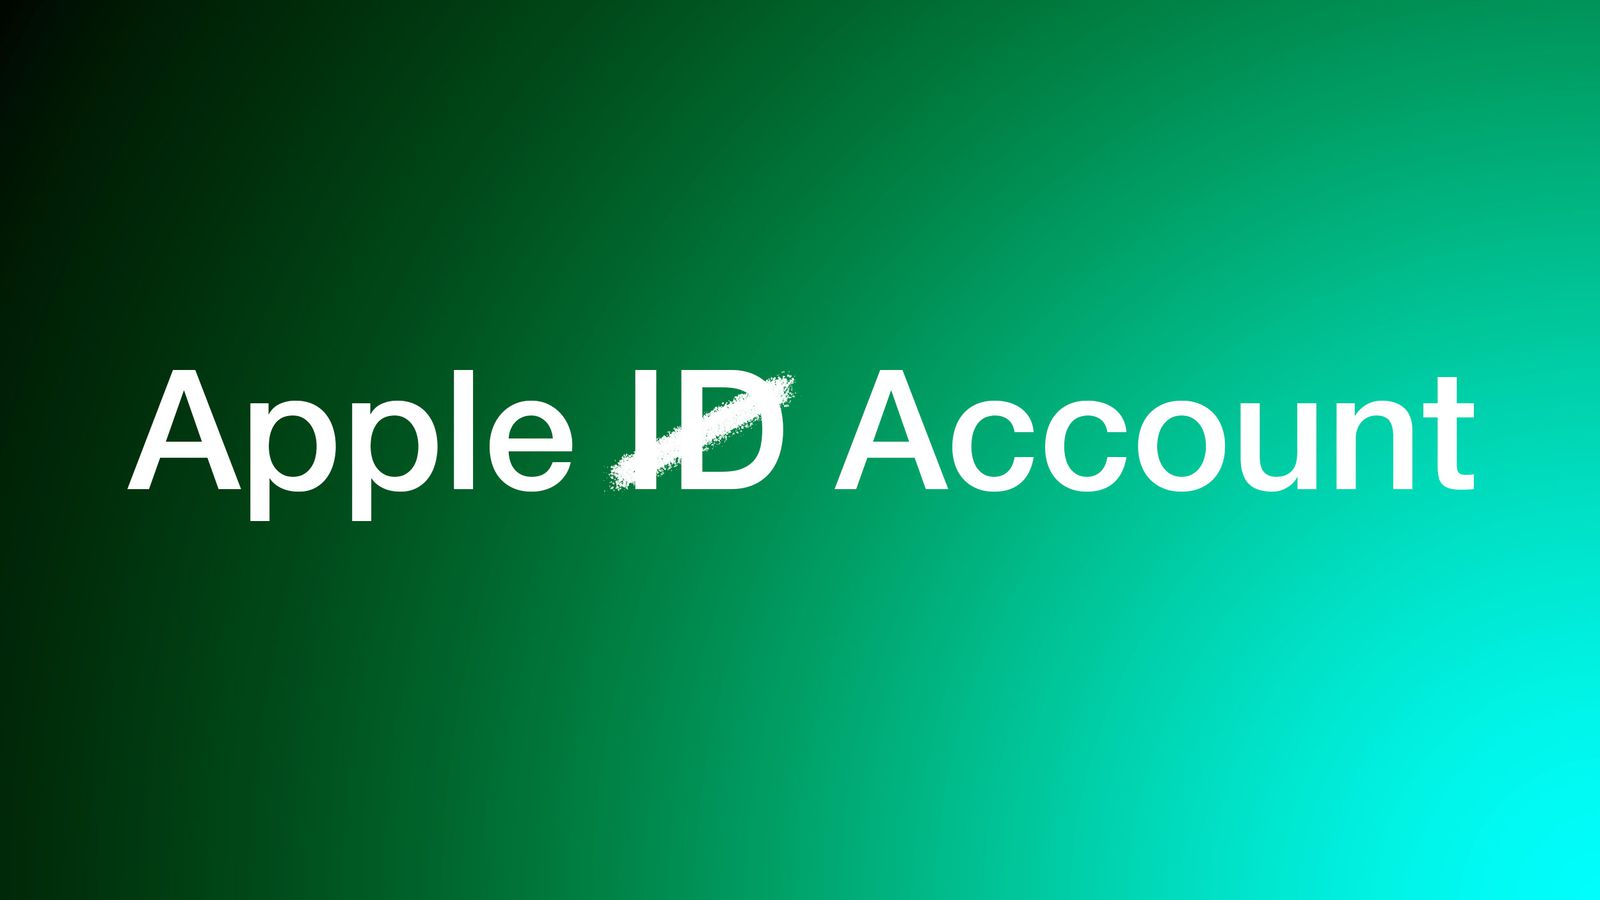 Apple-ID-to-be-Renamed-to-Account-Feature-2.jpg